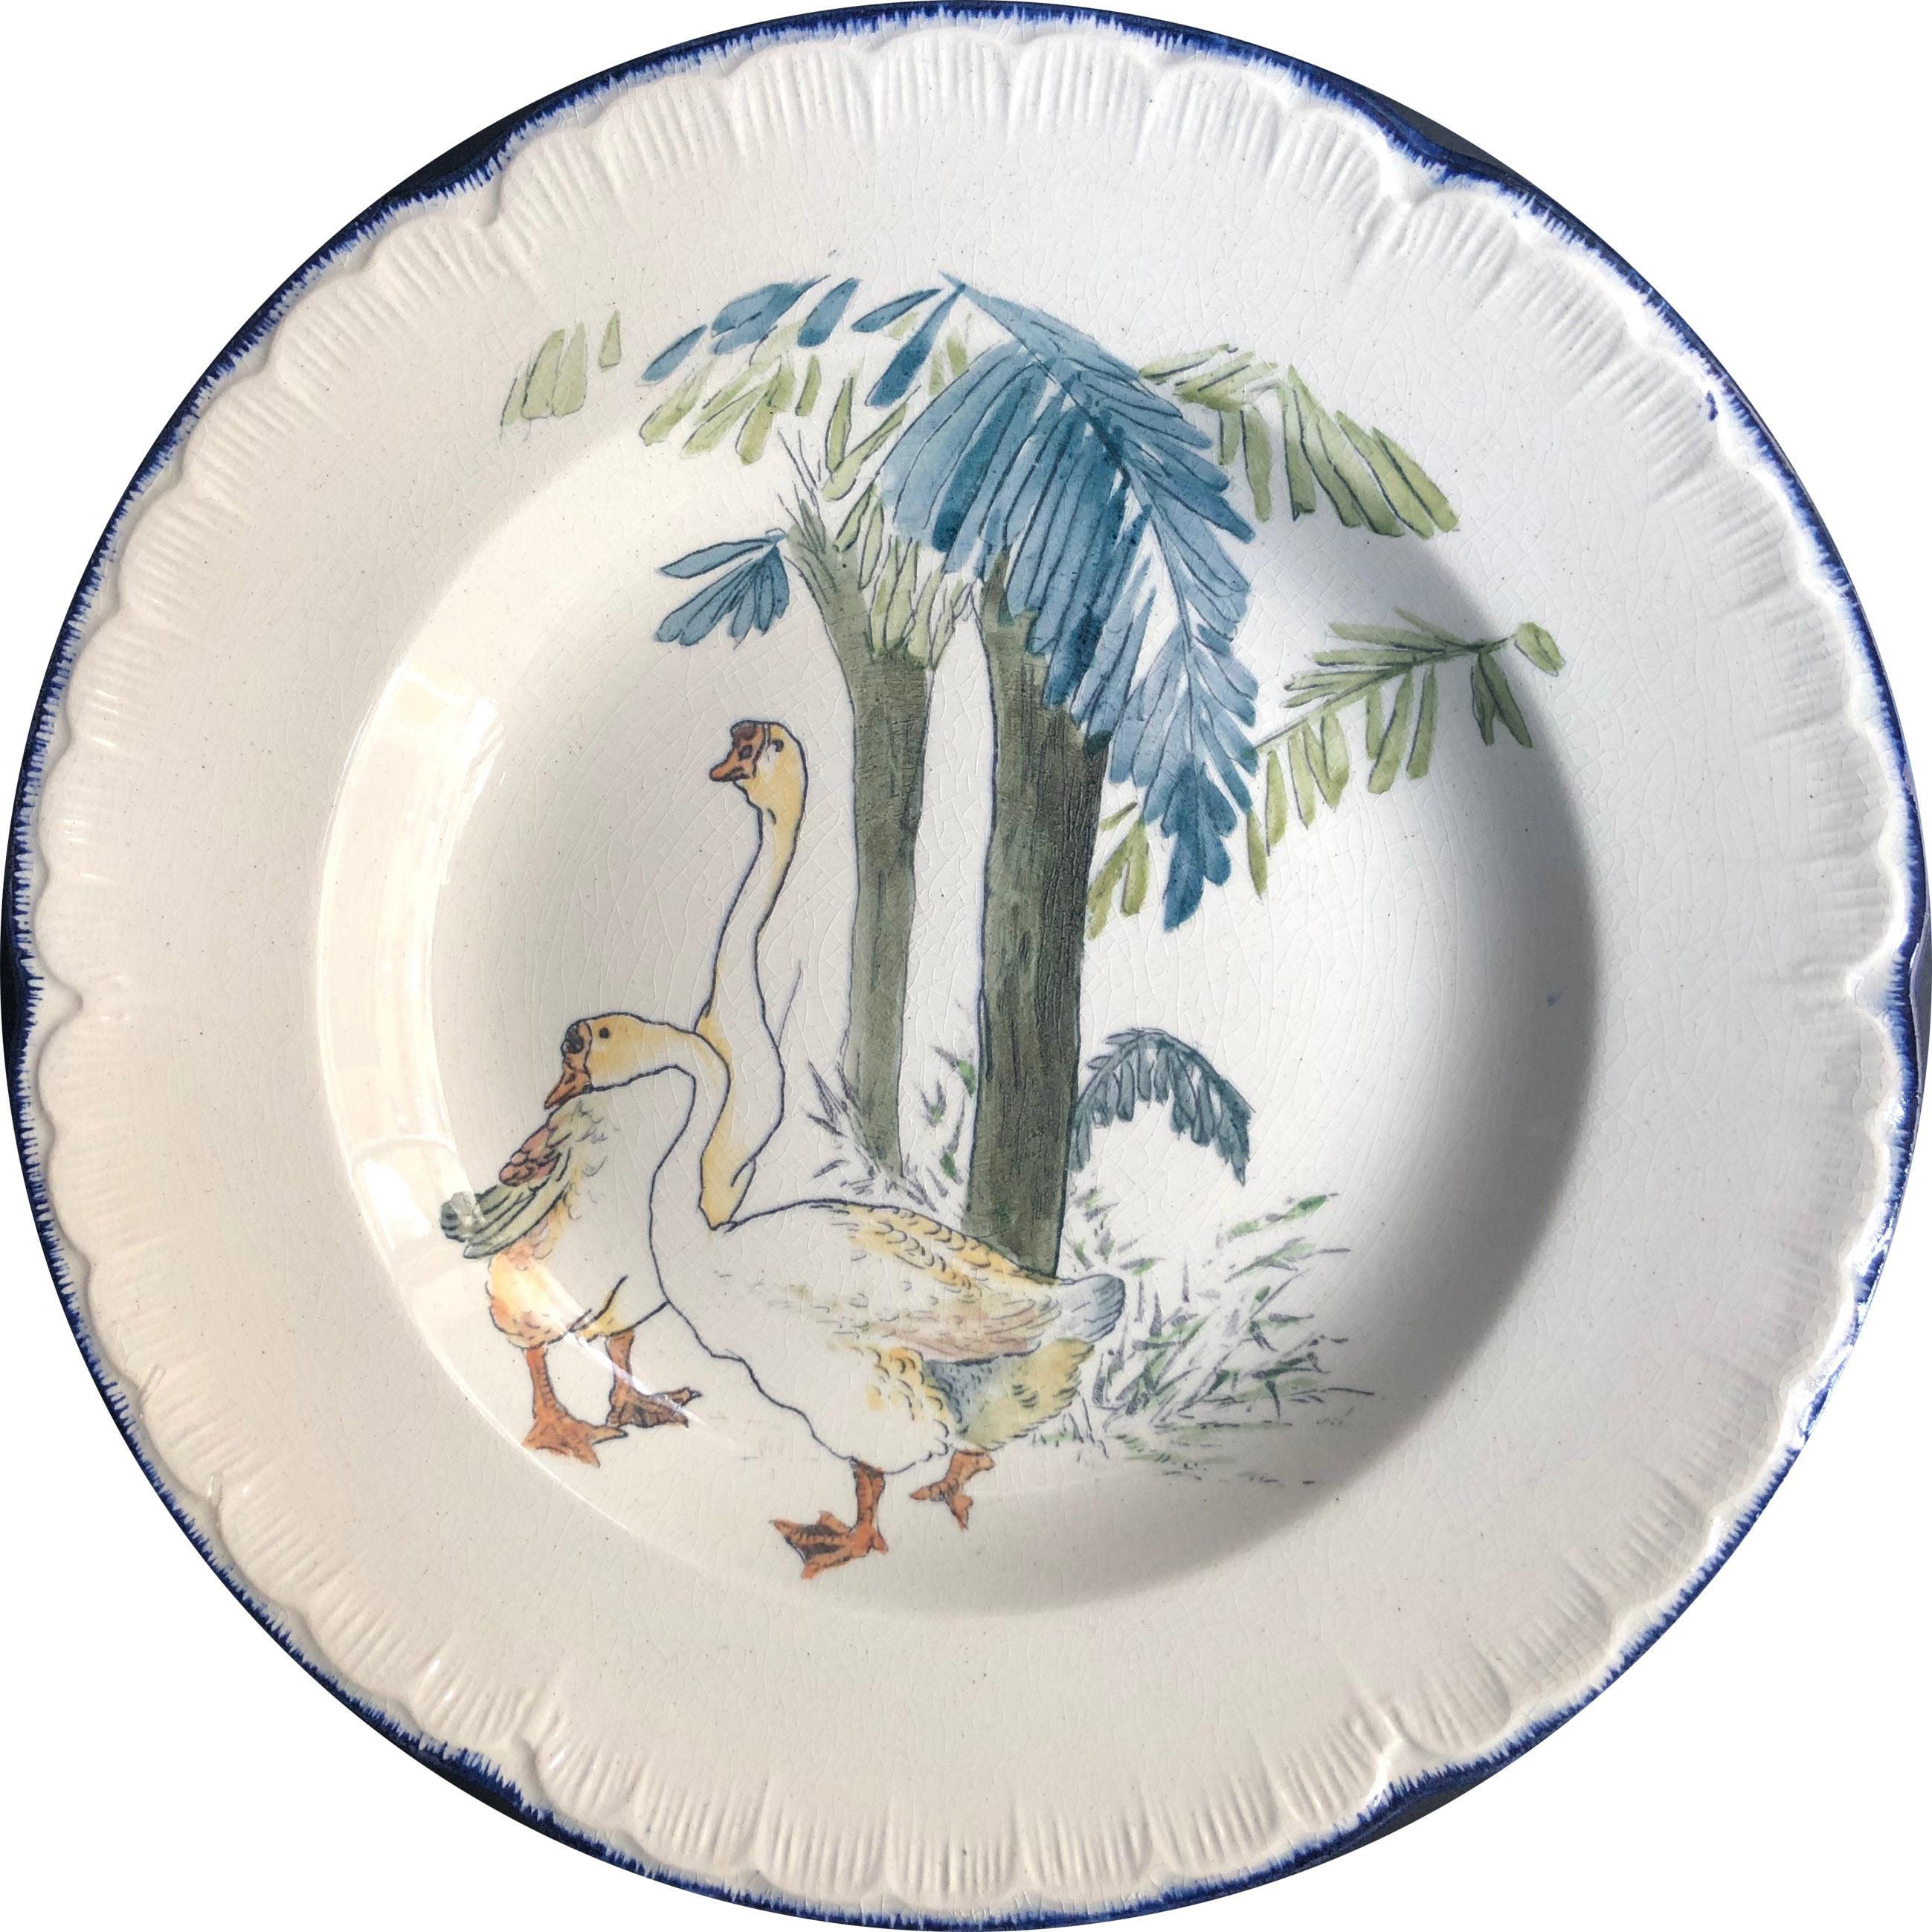 This French fine faience service of eight deep plates after Bracquemond was edited by 'Escalier De crystal', circa 1878, there are more than 24 different patterns all hand painted by French manufactory 'Choisy Le Roi'.
Rare size of the dinner plates